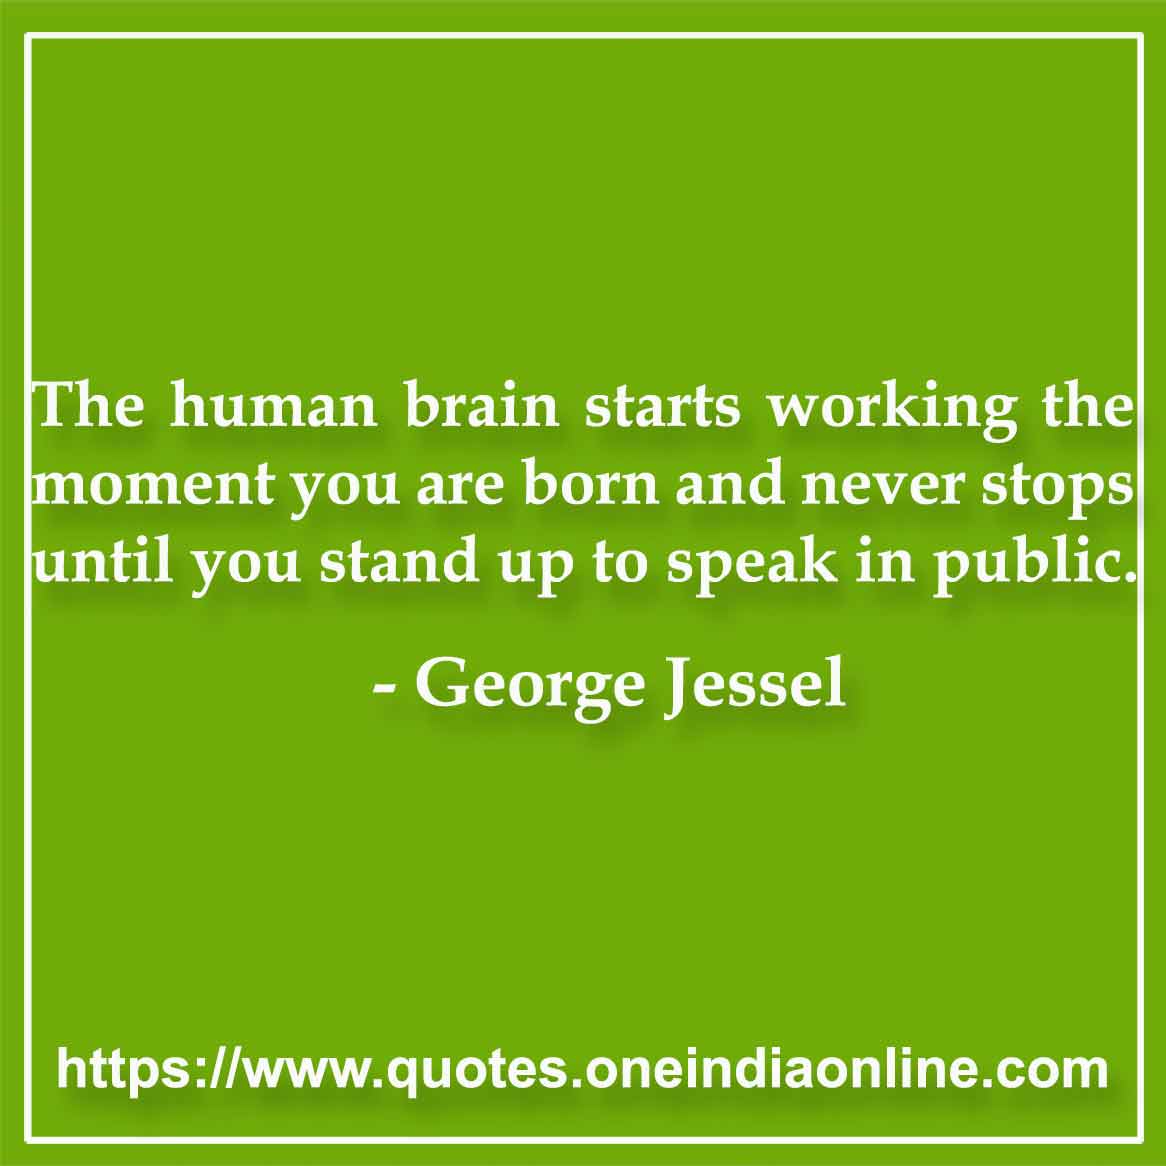 The human brain starts working the moment you are born and never stops until you stand up to speak in public.

- Brain Quote by George Jessel